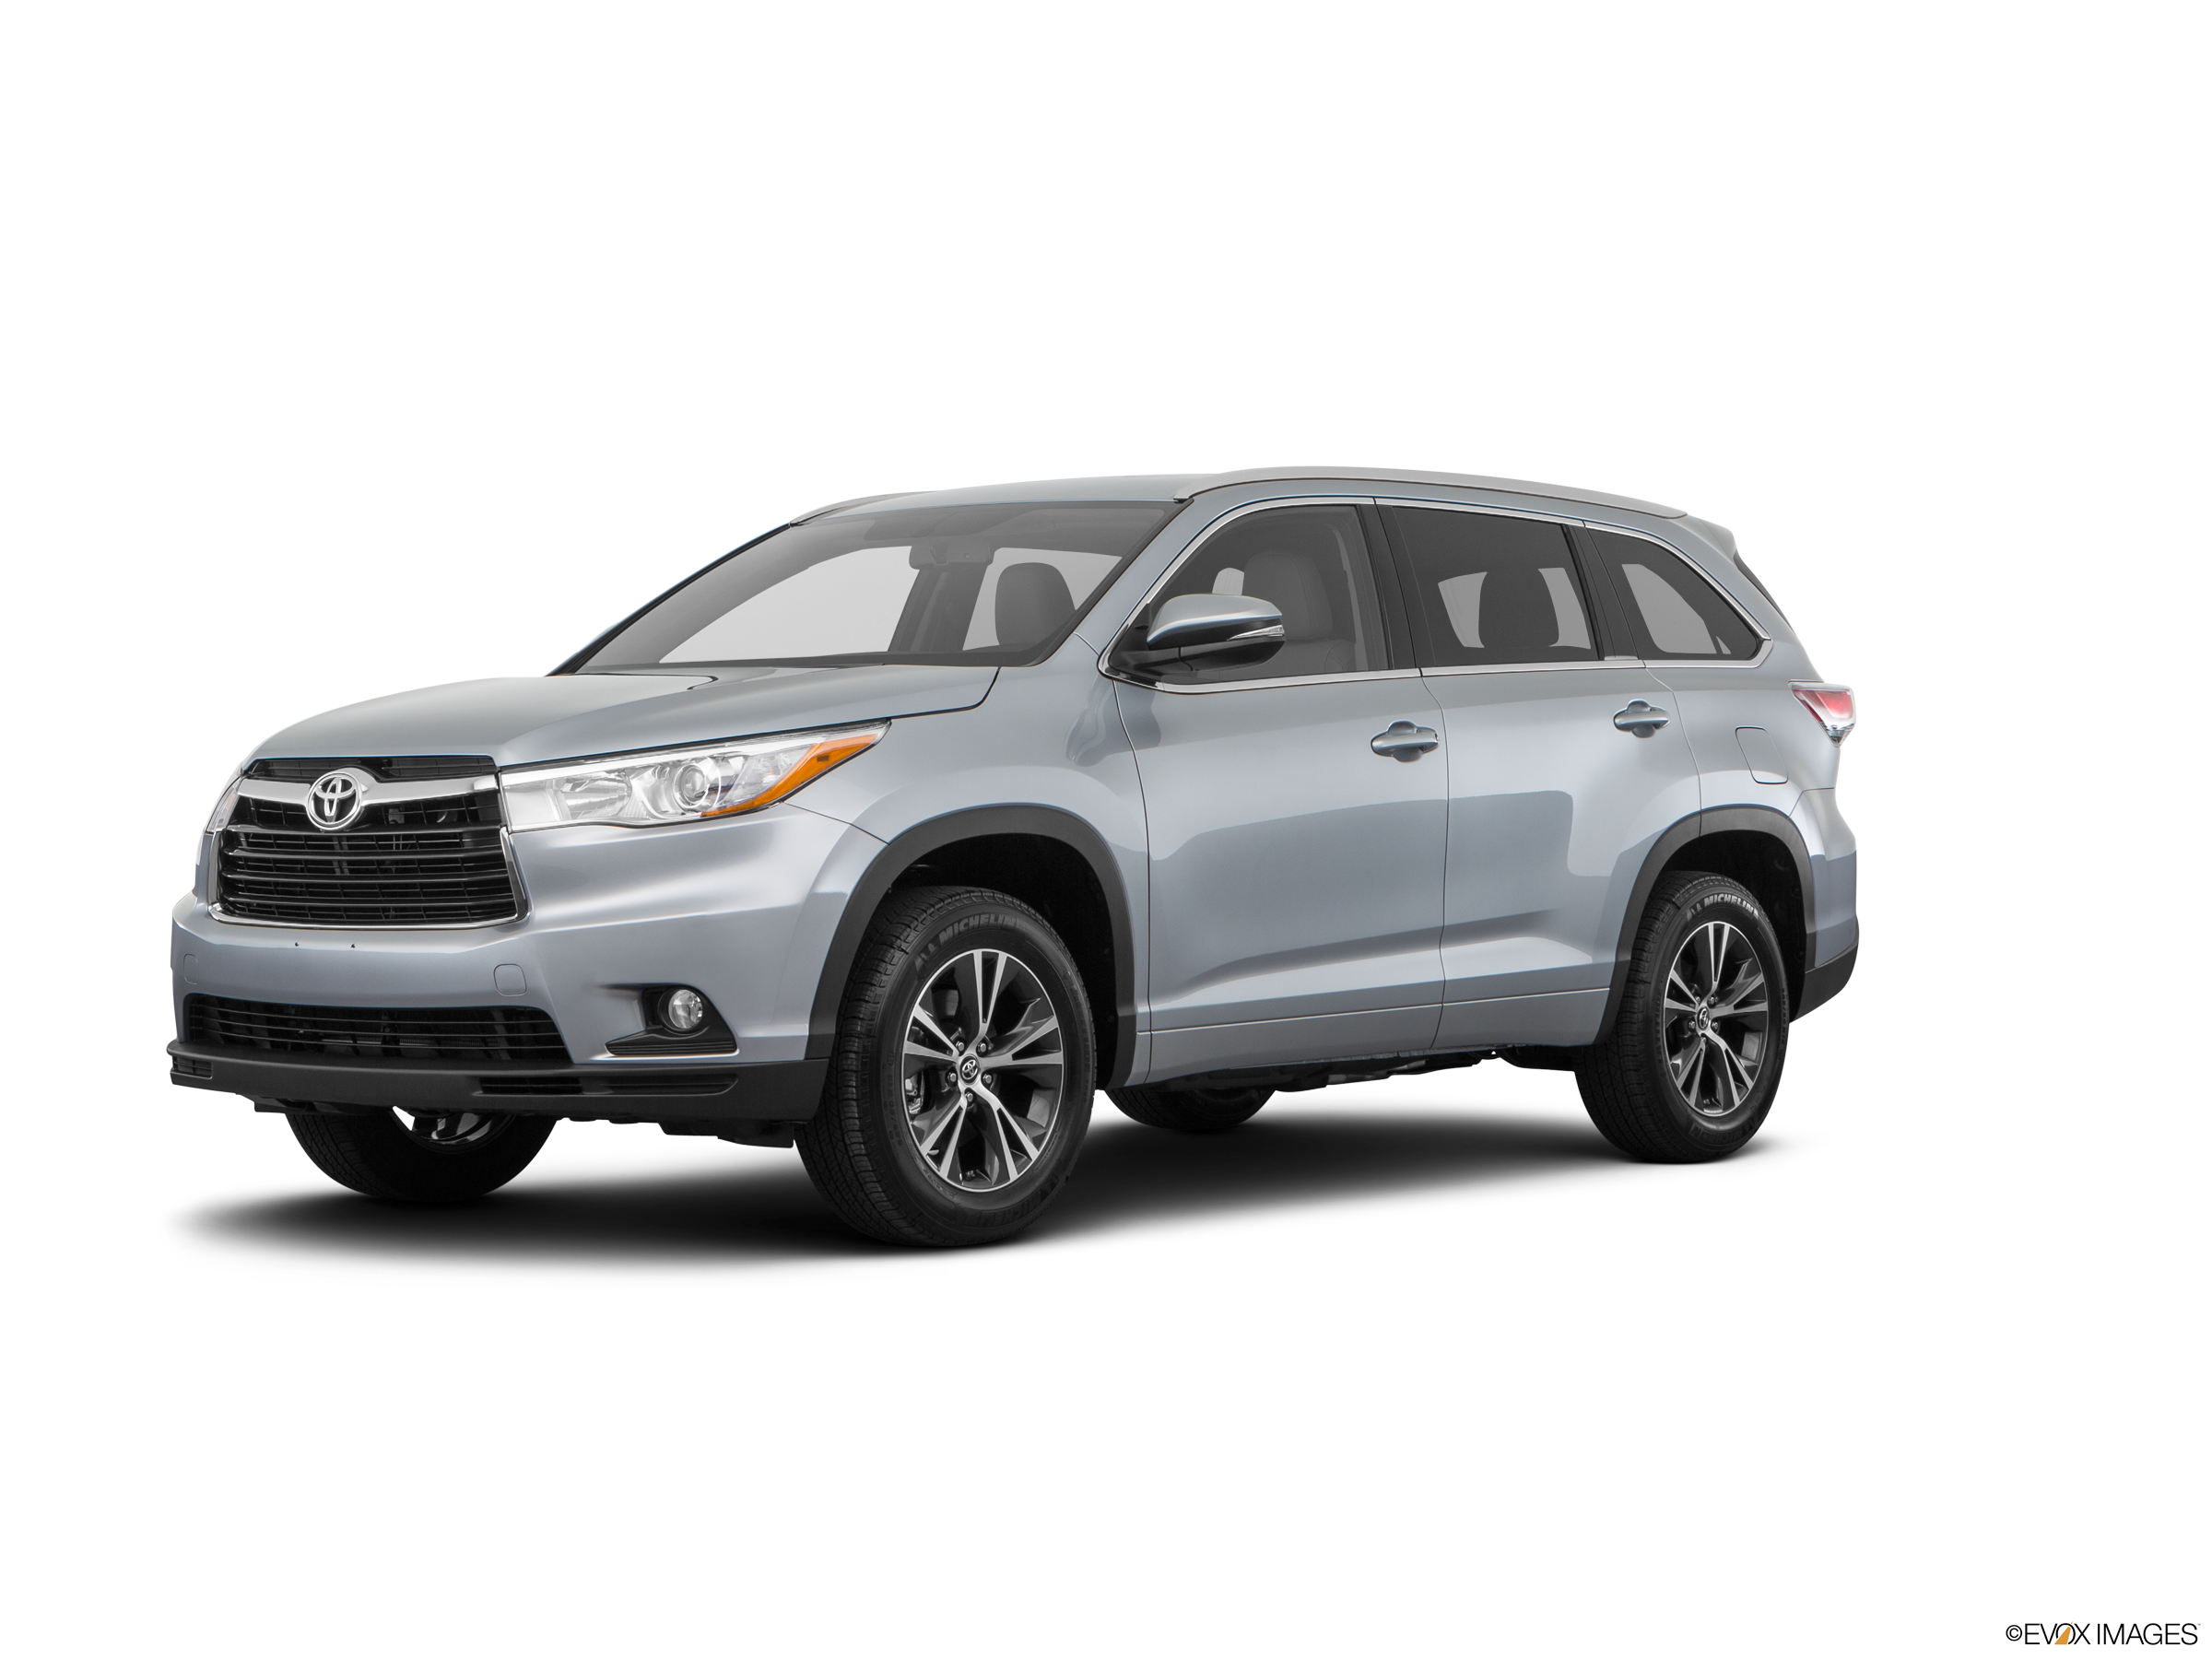 US News provides prices, reviews, and pictures of the Toyota Highlander.